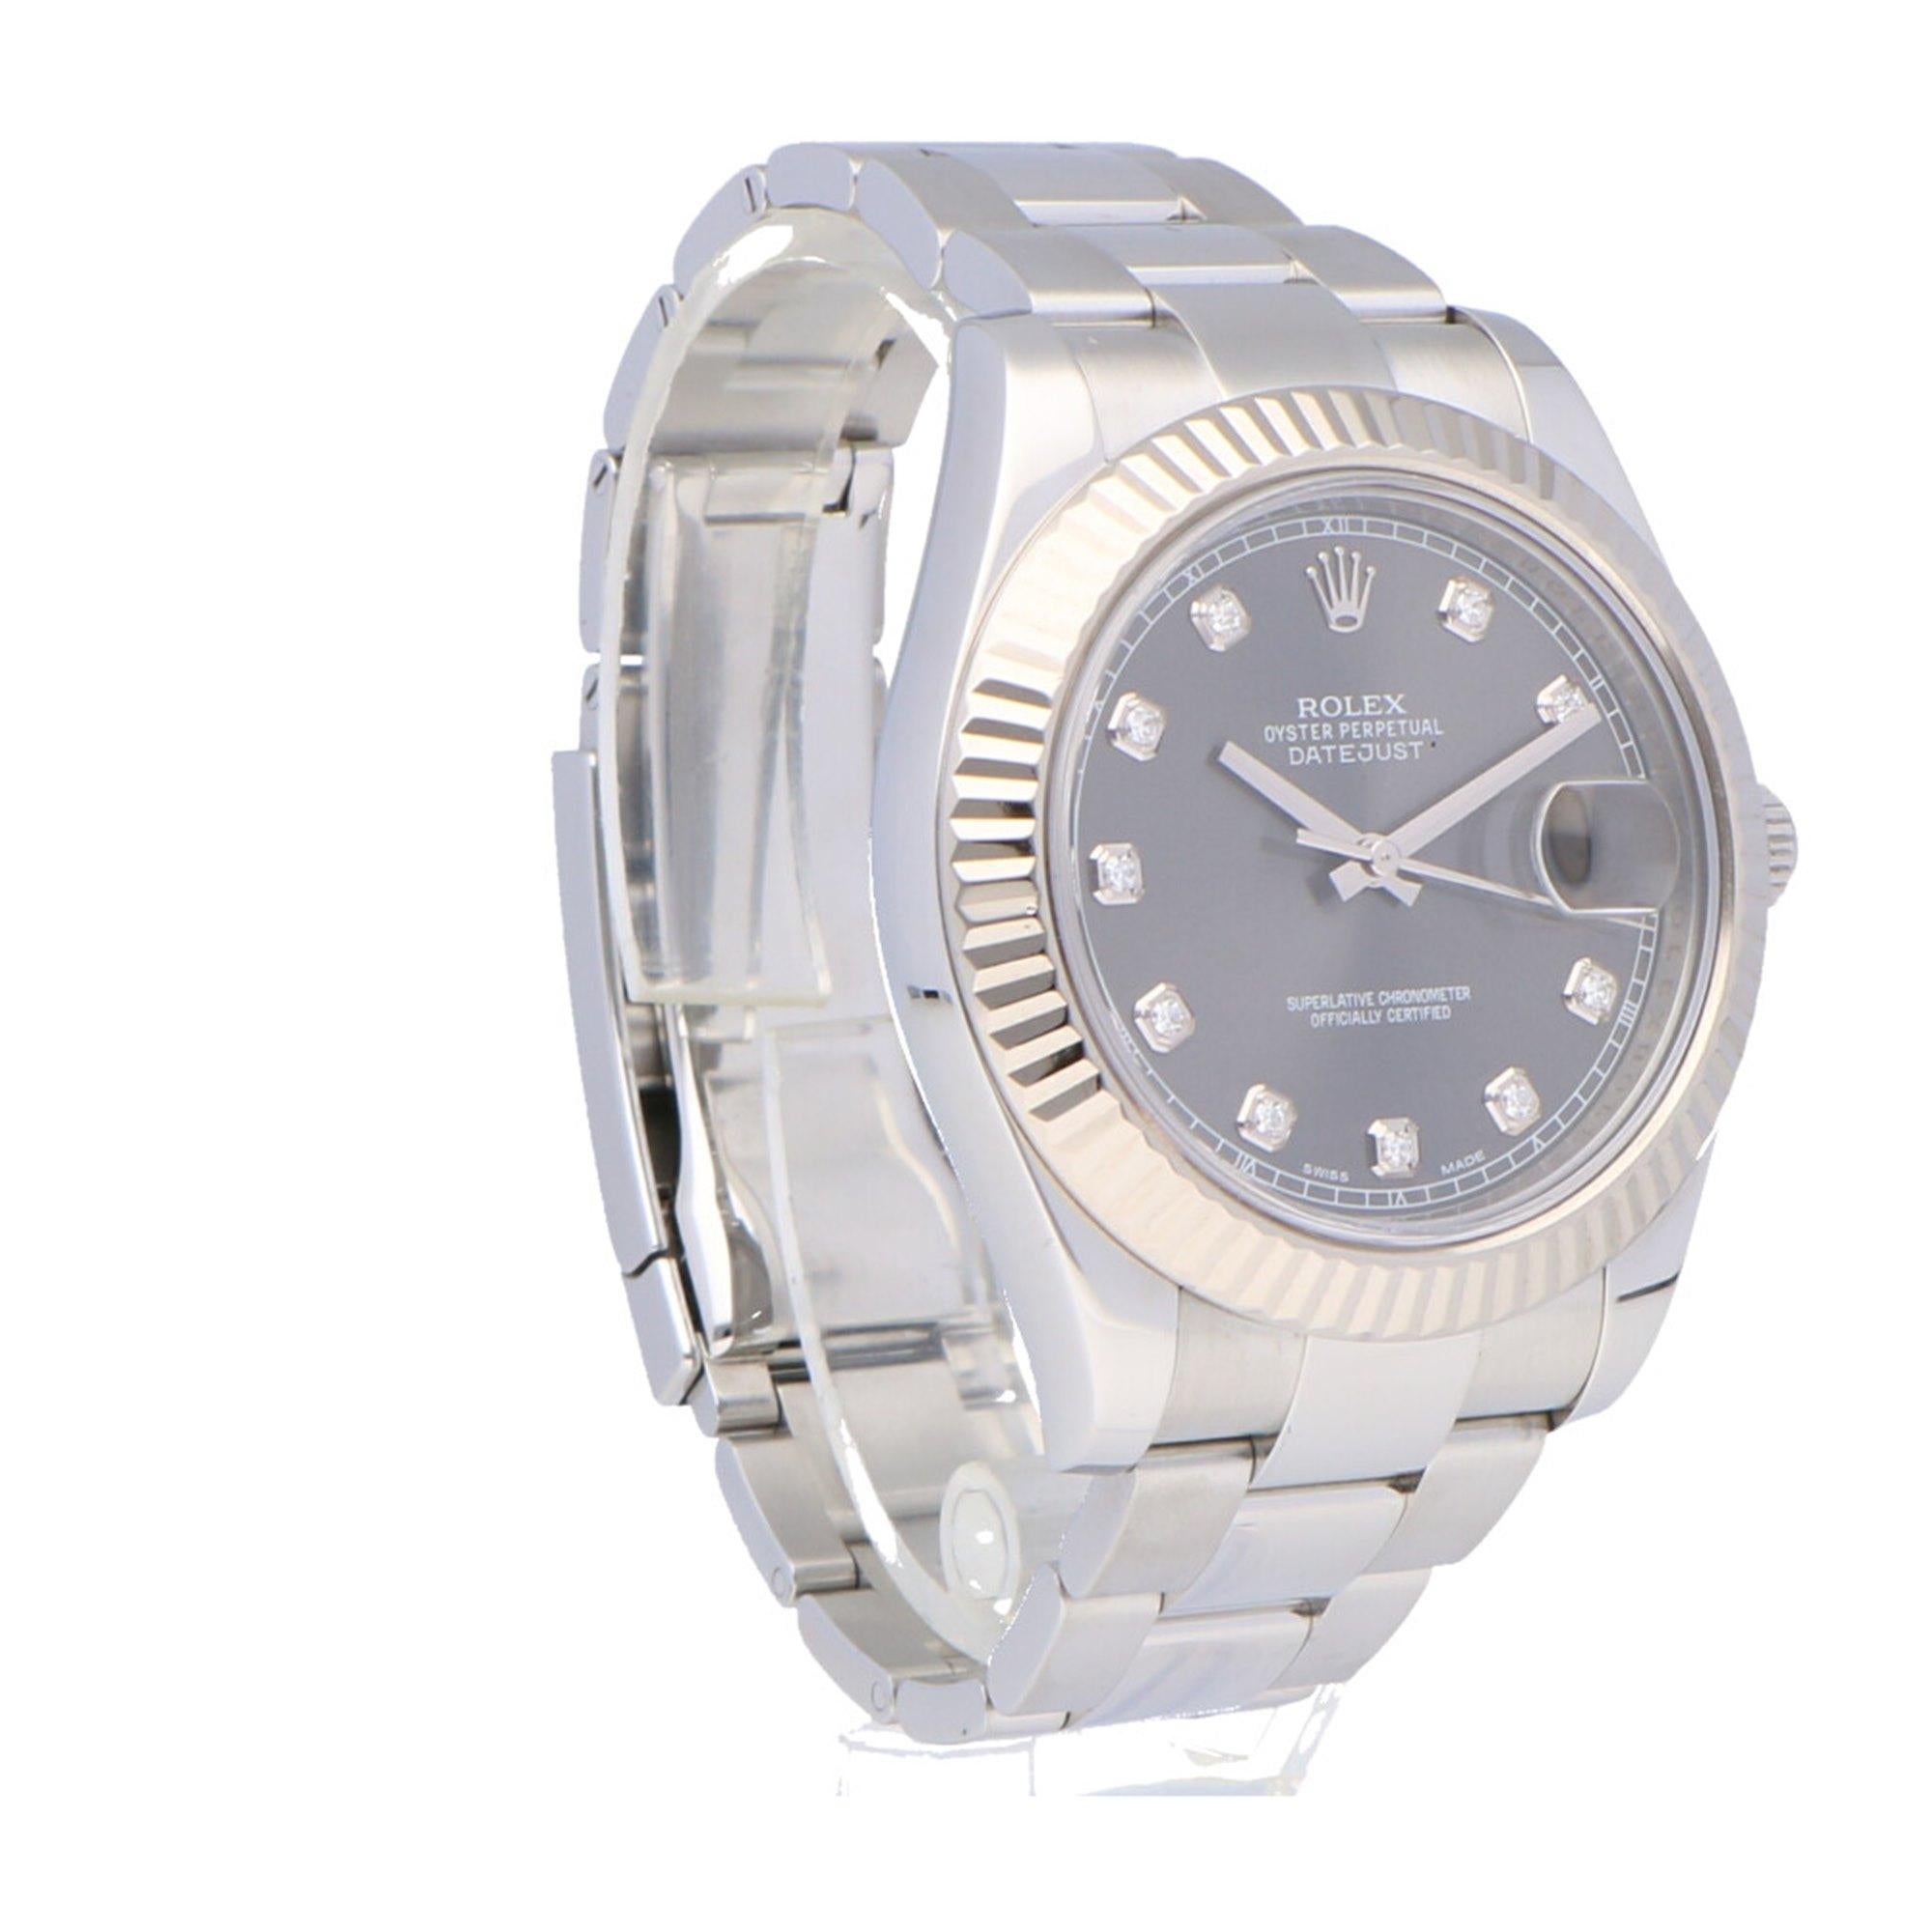 Pre-Owned Rolex Datejust Stainless Steel 116334 Watch 4